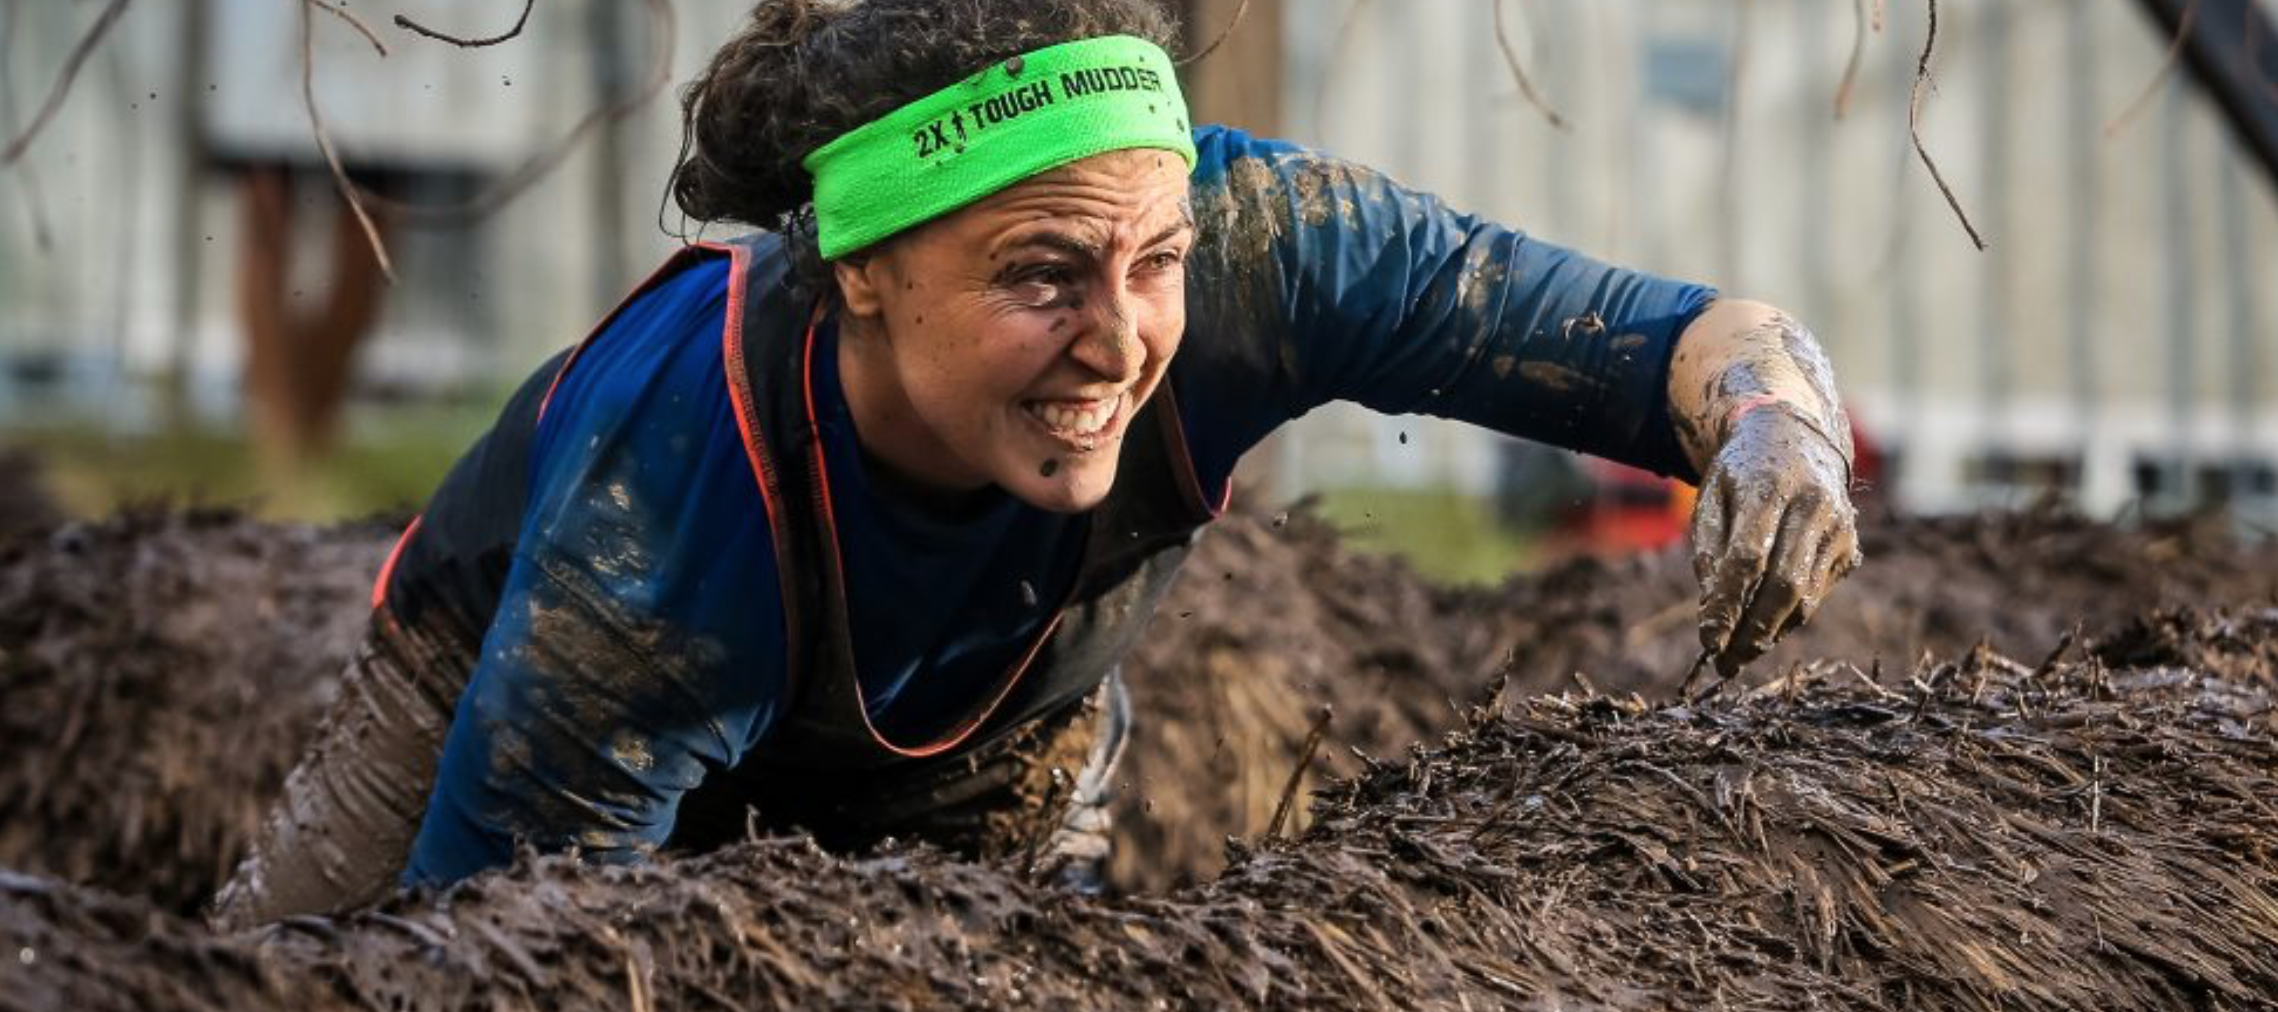 JOIN THE TOUGH MUDDER QLD